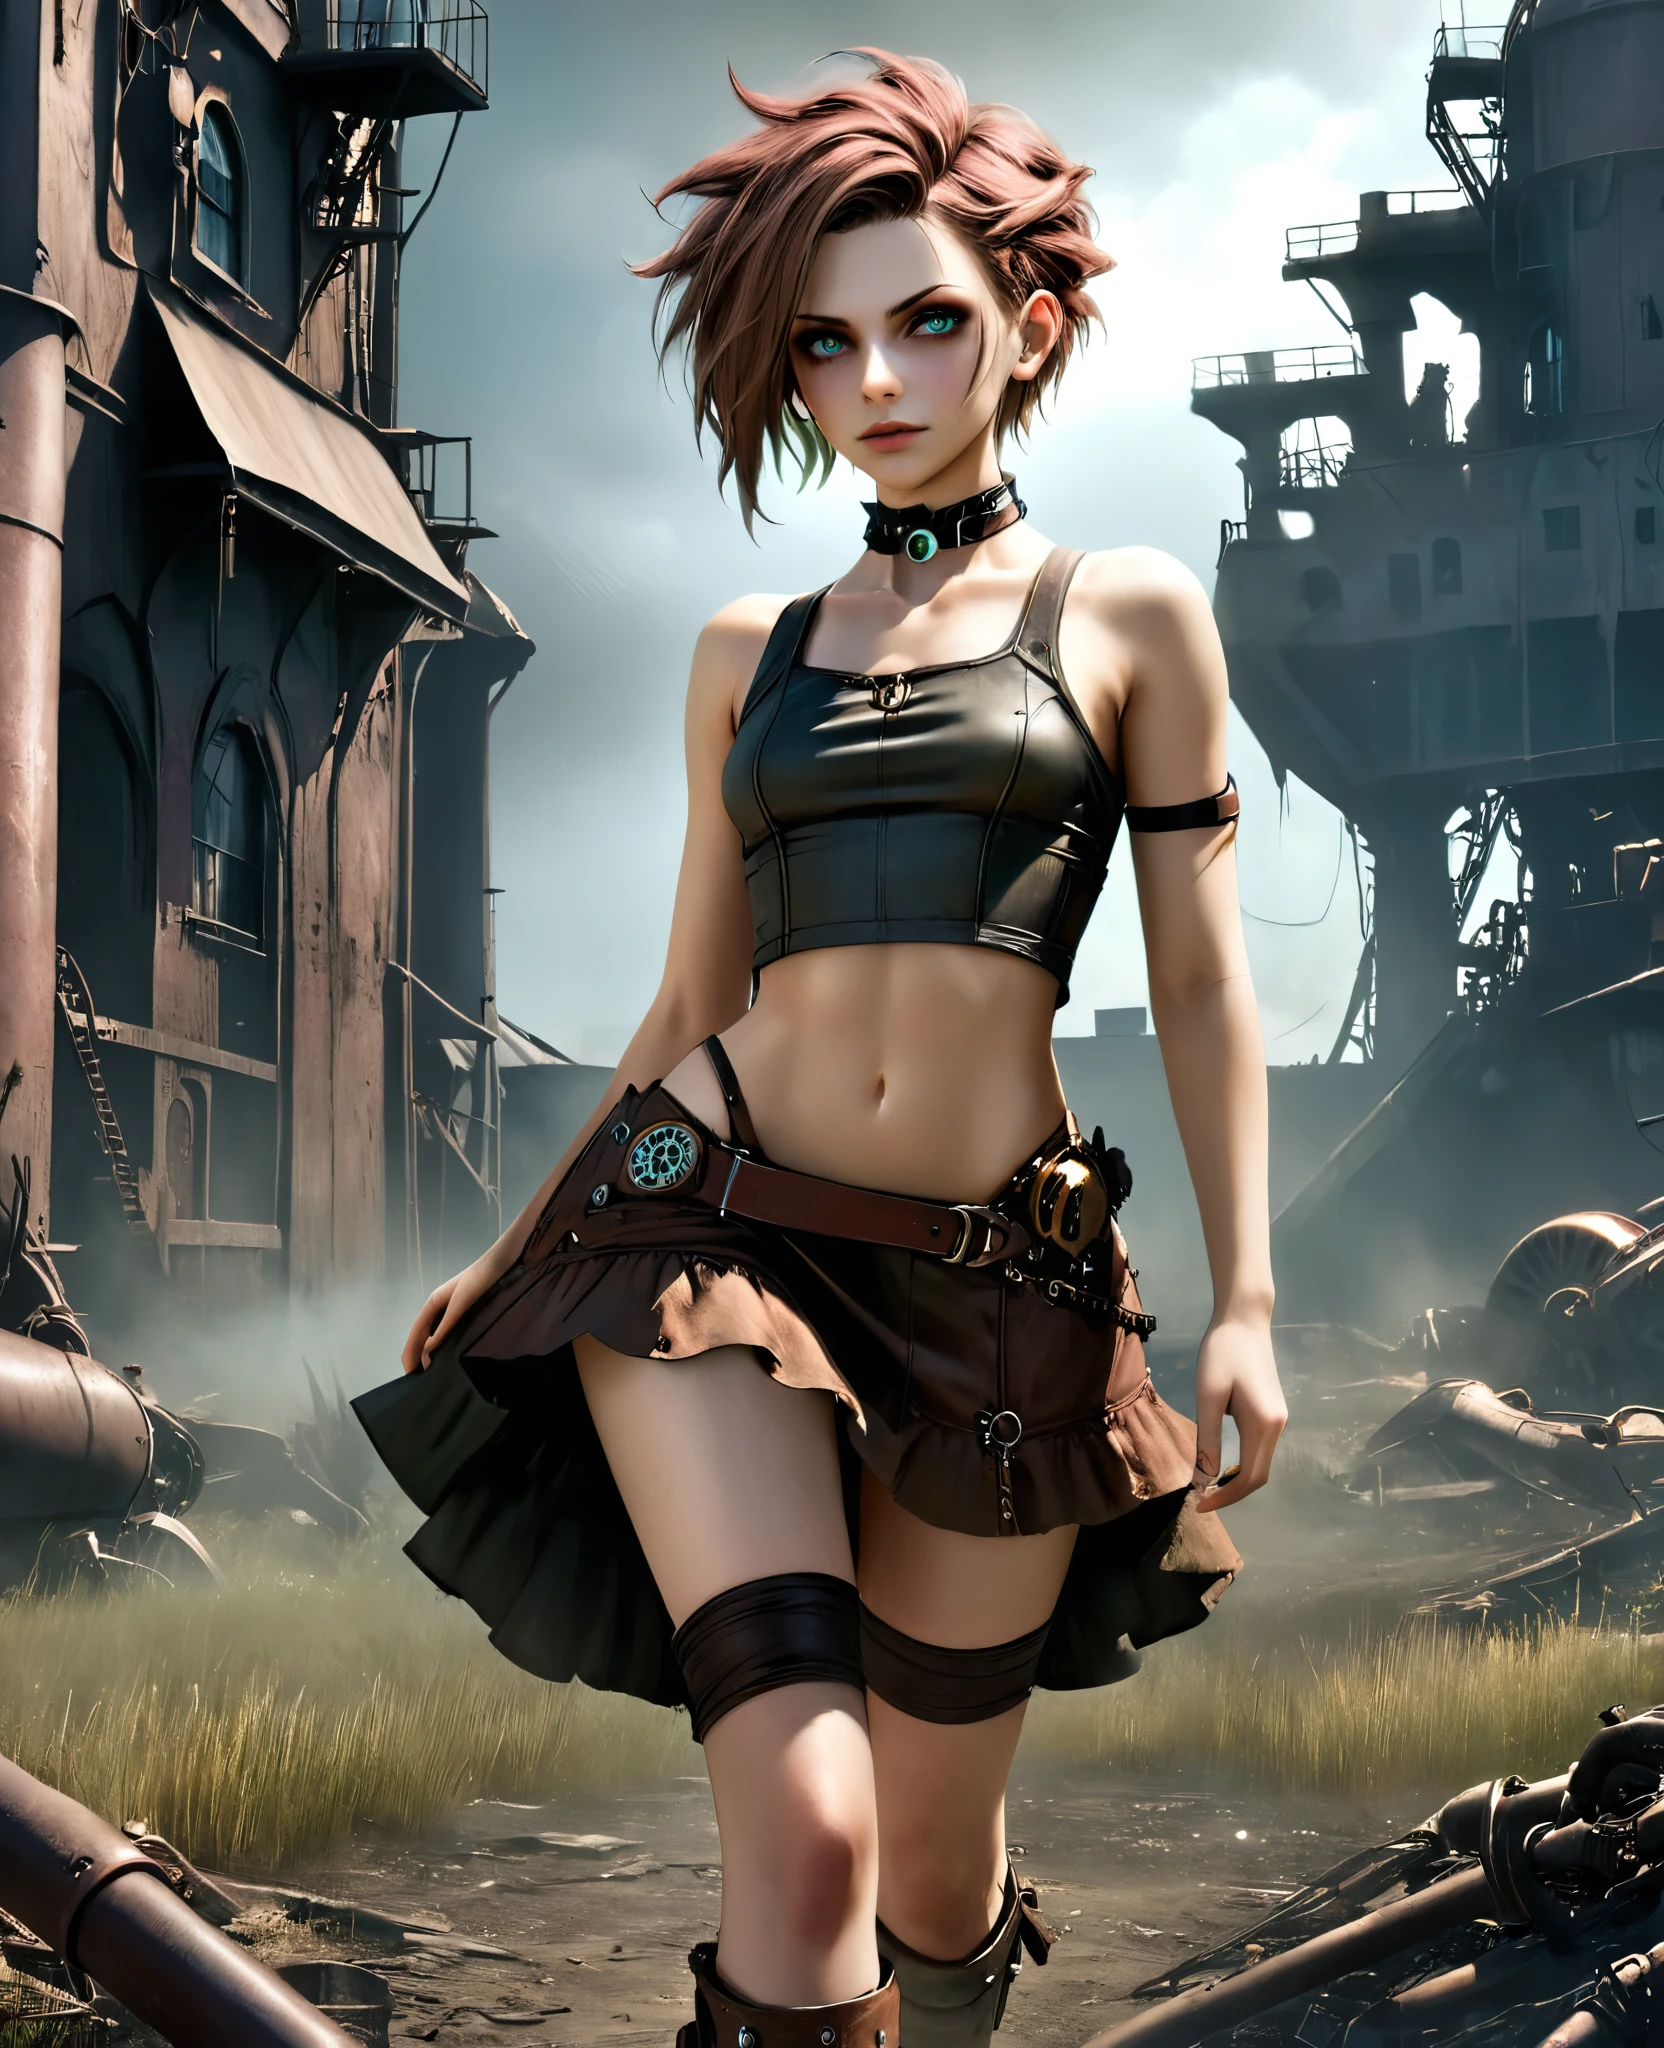 (((high resolution))), (((extremely detailed))), ((masterpiece)), dramatic shadows, depth of field, analog photo style, (world in which are collide steampunk and postapocalyptic vibes), postapocalyptic cute female in steampunk torn dirty clothes, looks like Aerith Gainsborough, depth of field, full body shot, unzoomed, (perfect body: 1.4), (sidecut short hairstyle), (stalking is quite common, although not the best way to make a living), looks interested, stylized atmosphere of unreality, dark aesthetic, dynamic pose, in motion, Armageddon, increase cinematic lighting, highly lifelike skin texture, parted lips, weary eyes, fine eyes, whitened skin, random hair colour, doomsday aura,